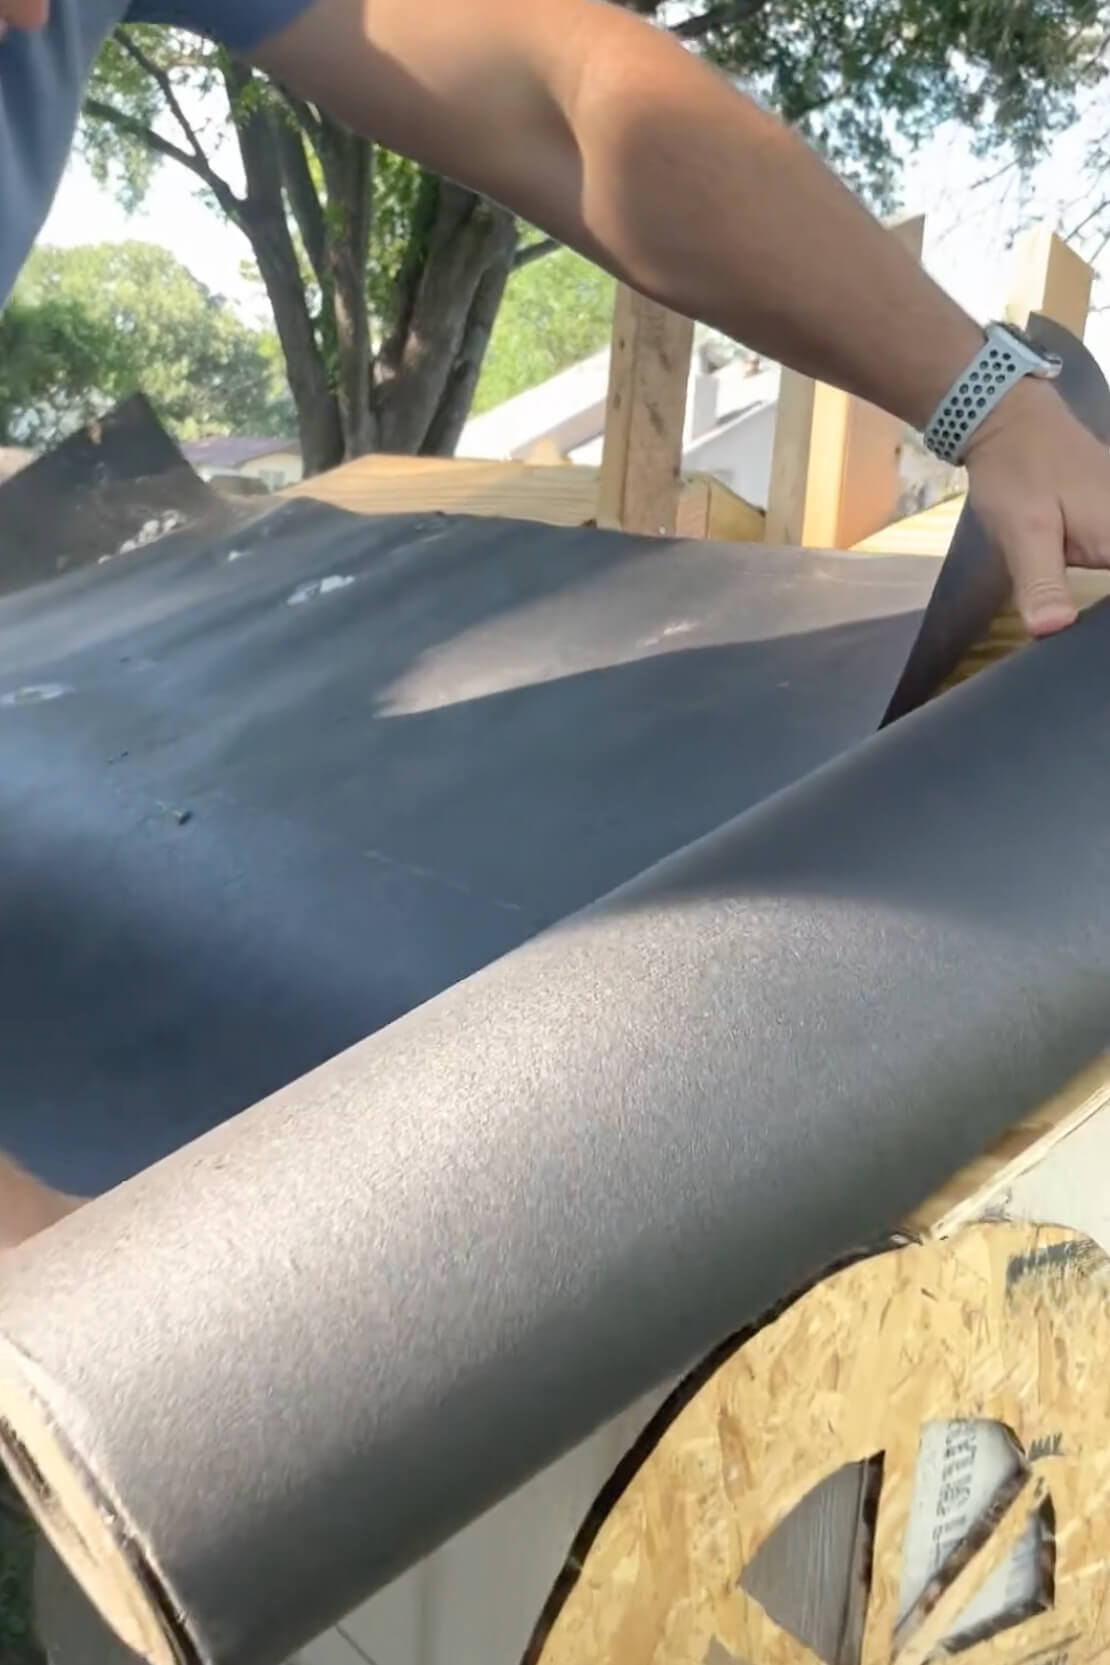 Using tar paper for roofing on low cost DIY chicken coop.